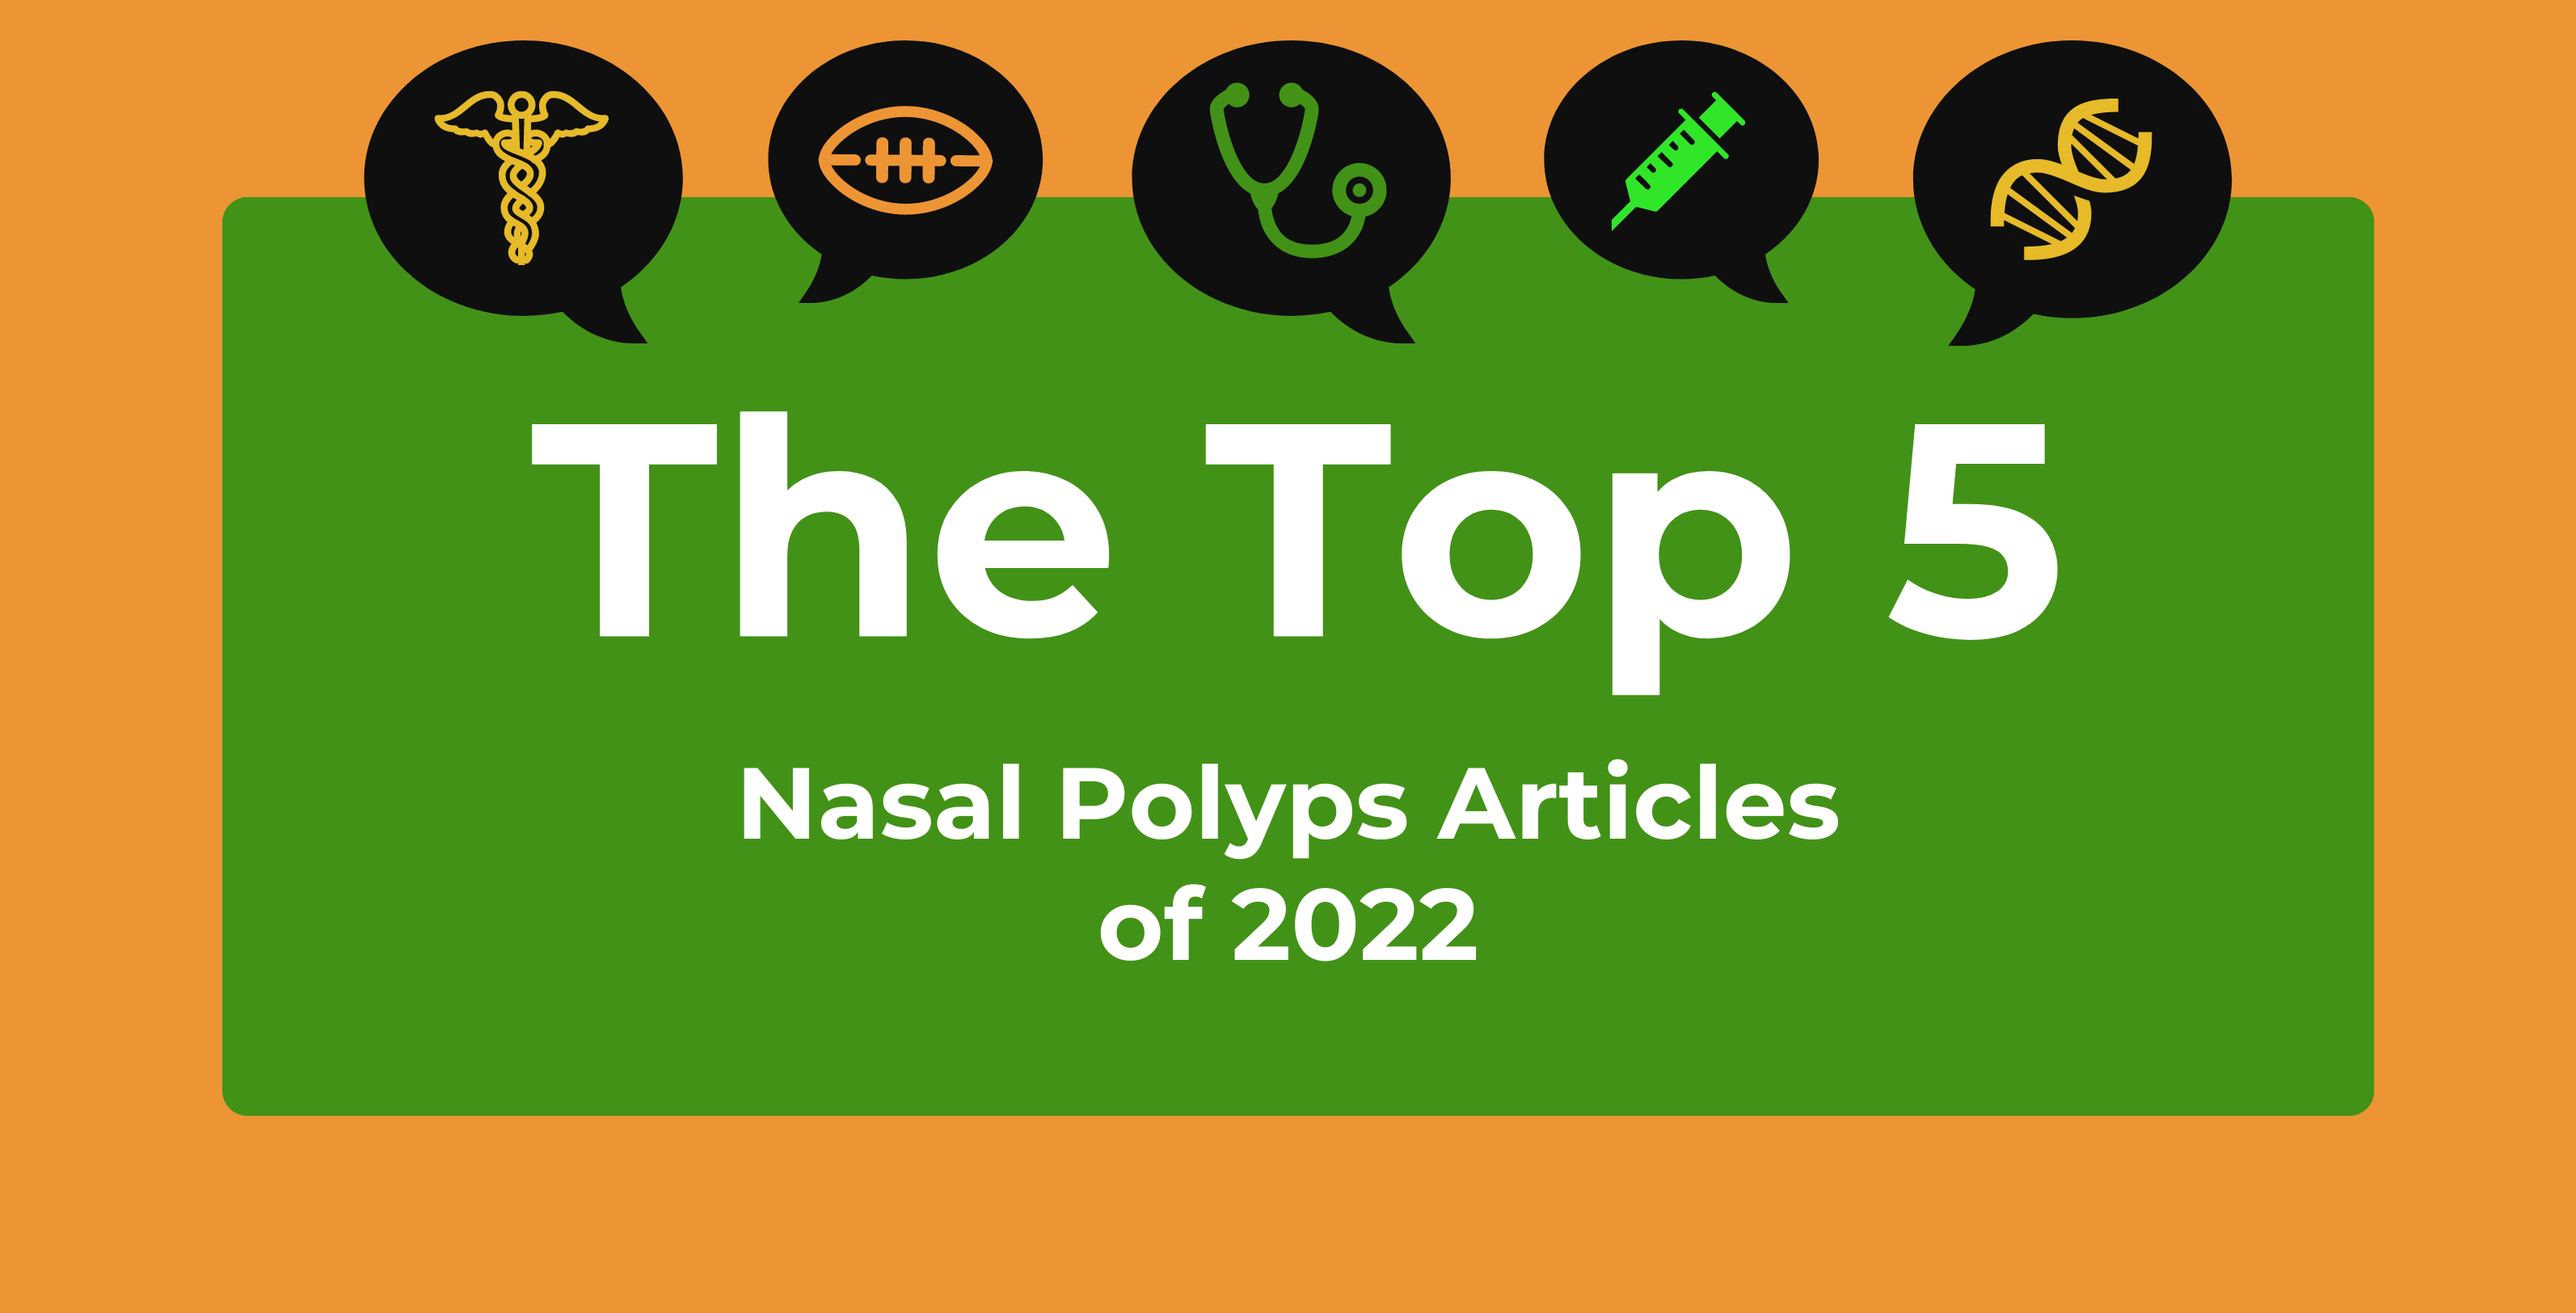 Graphic representing top 5 nasal polyps articles for 2022